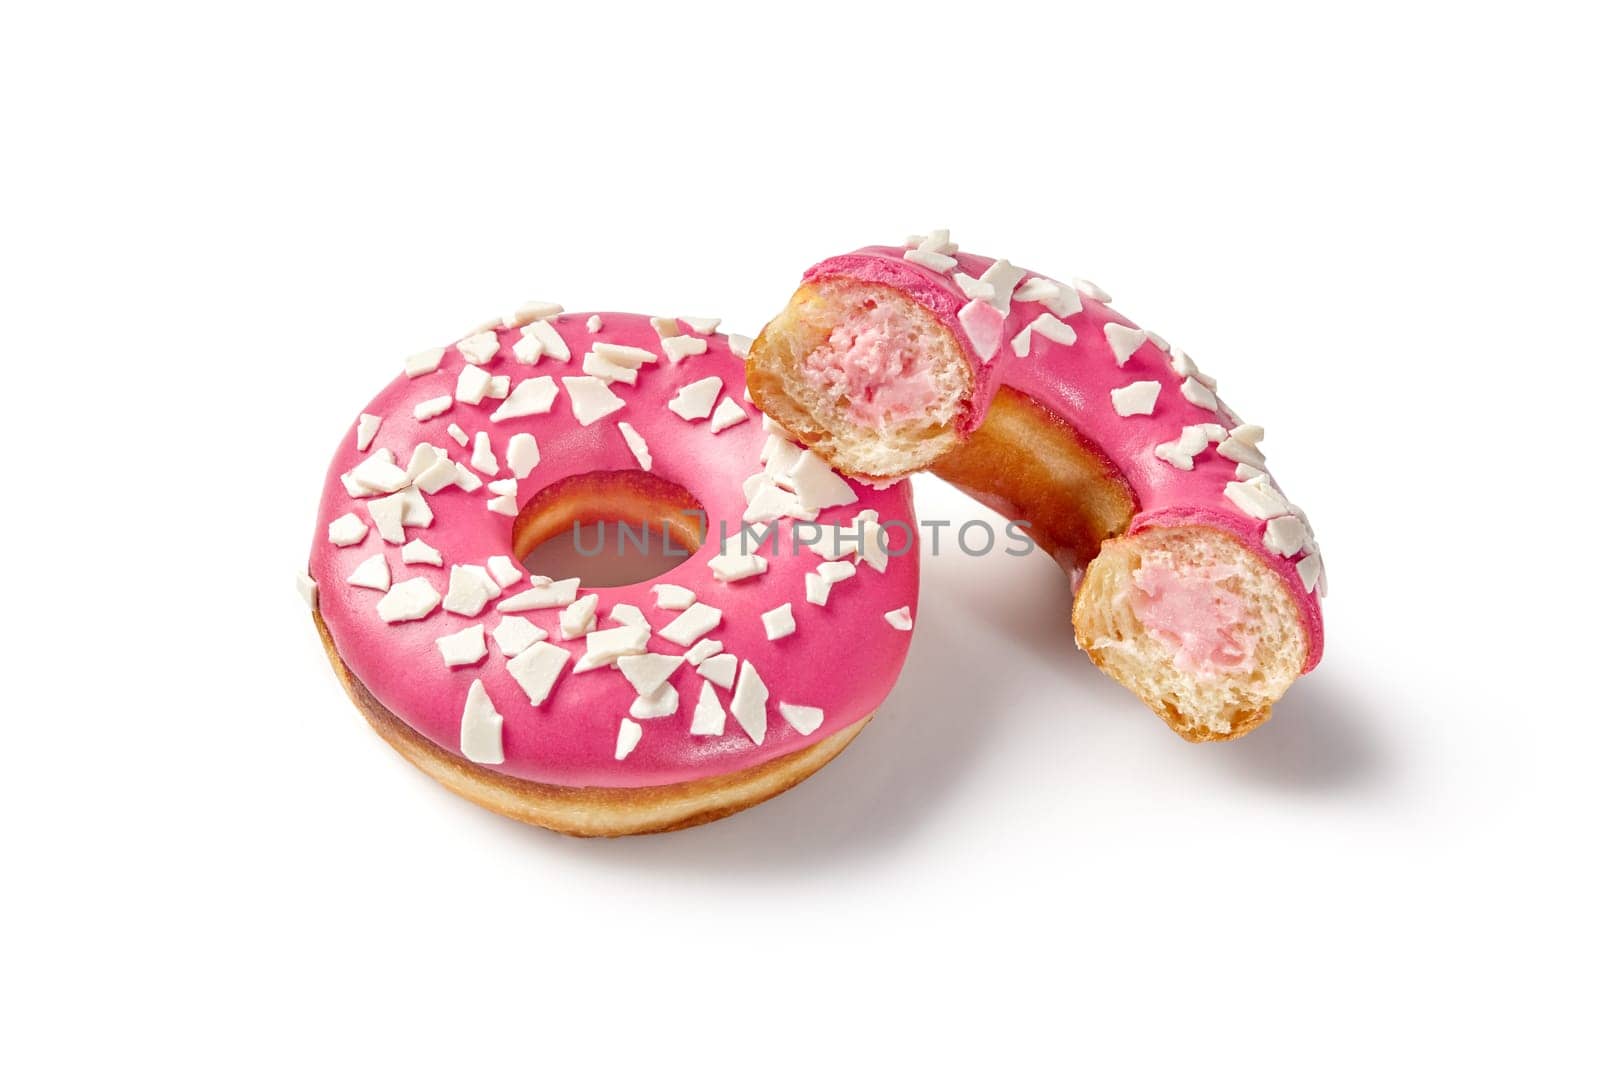 Appetizing soft fluffy donuts with creamy berry filling and vibrant pink icing sprinkled with white chocolate chips. Popular confectionery